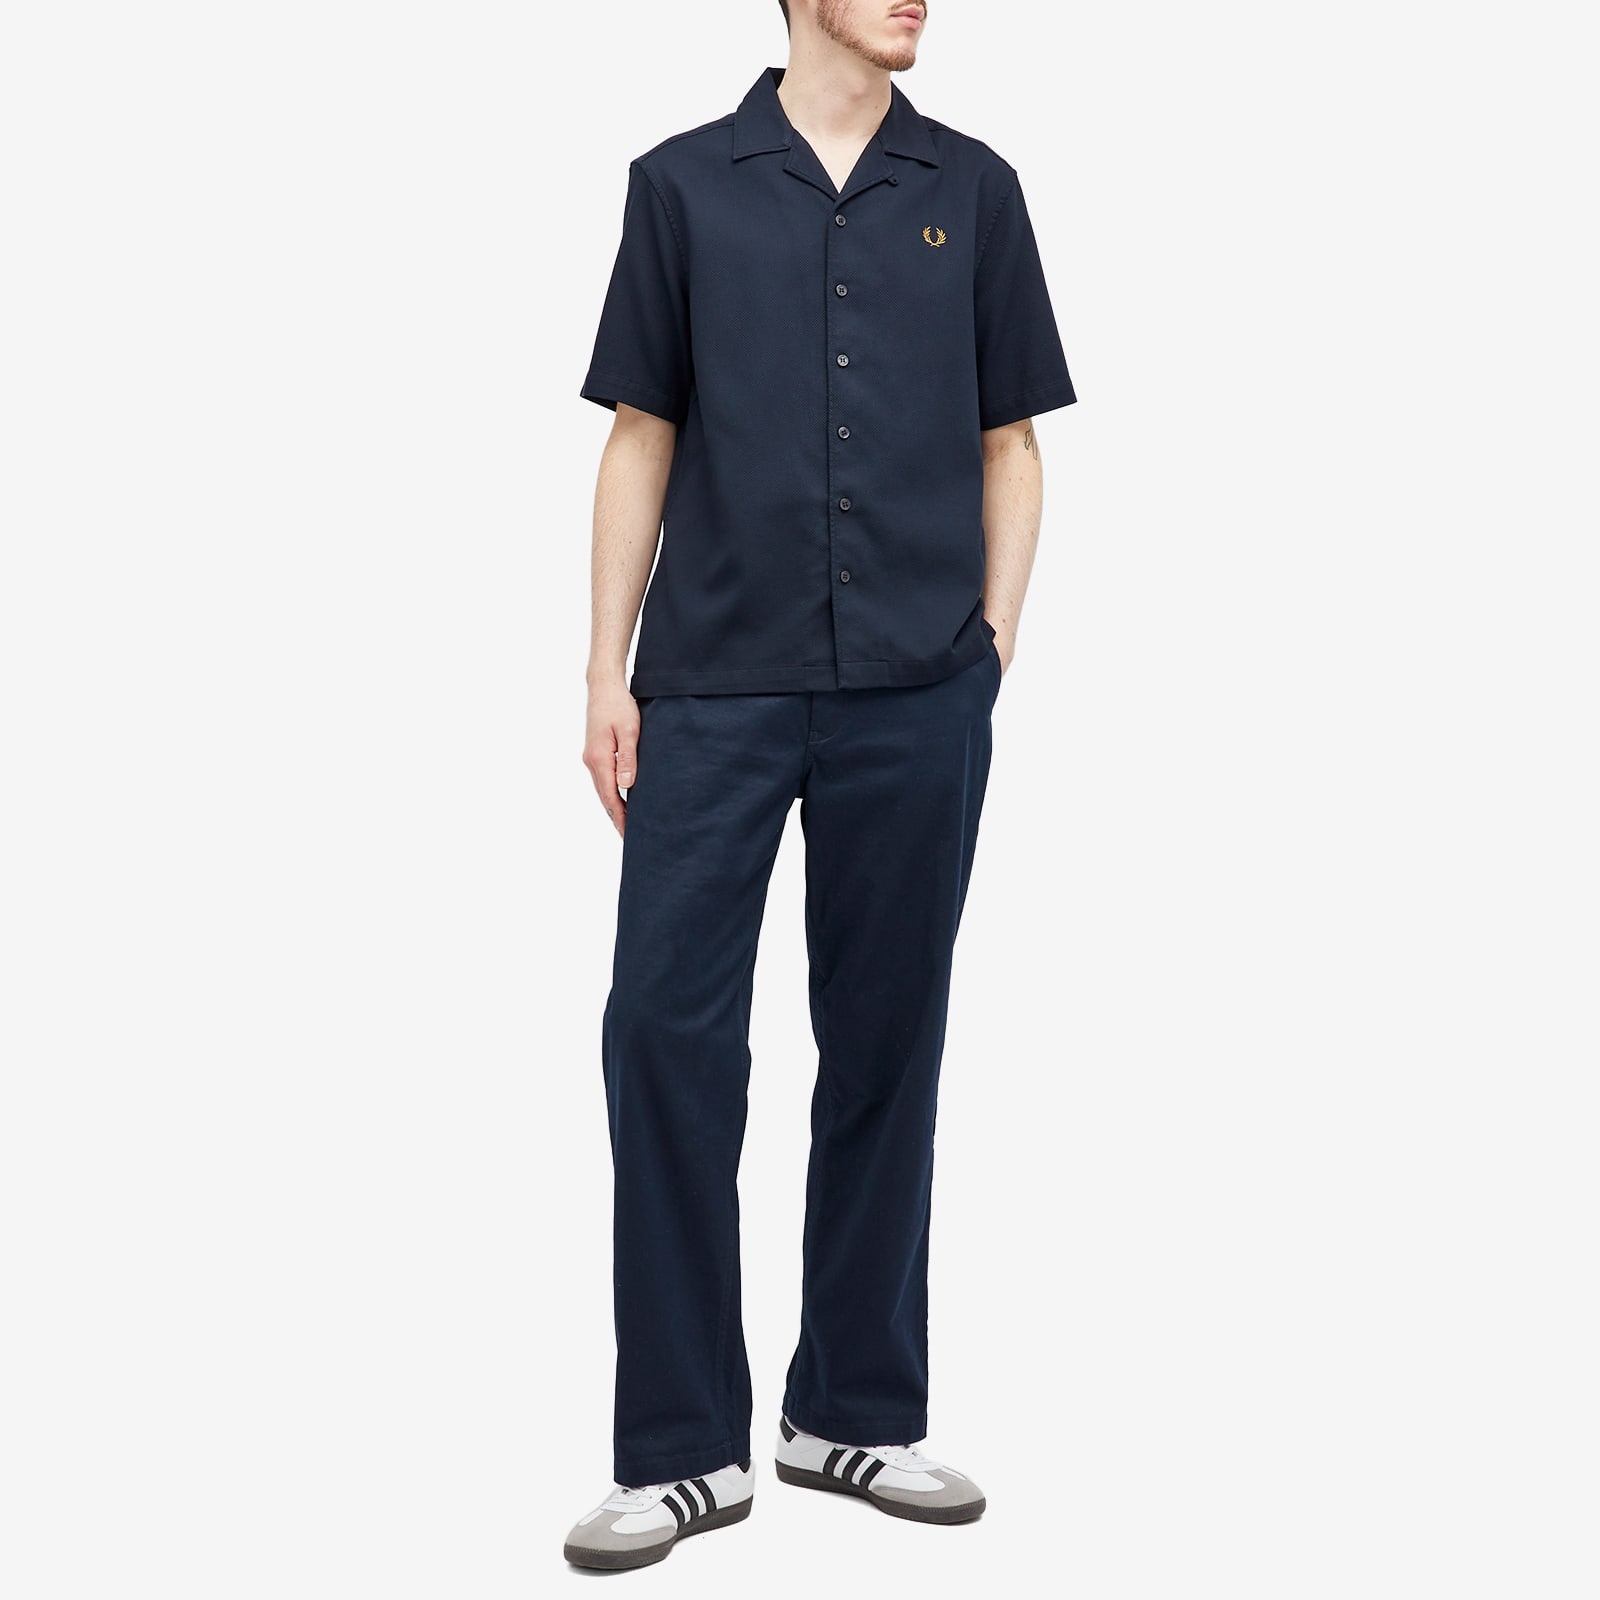 Fred Perry Pique Short Sleeve Vacation Shirt - 4